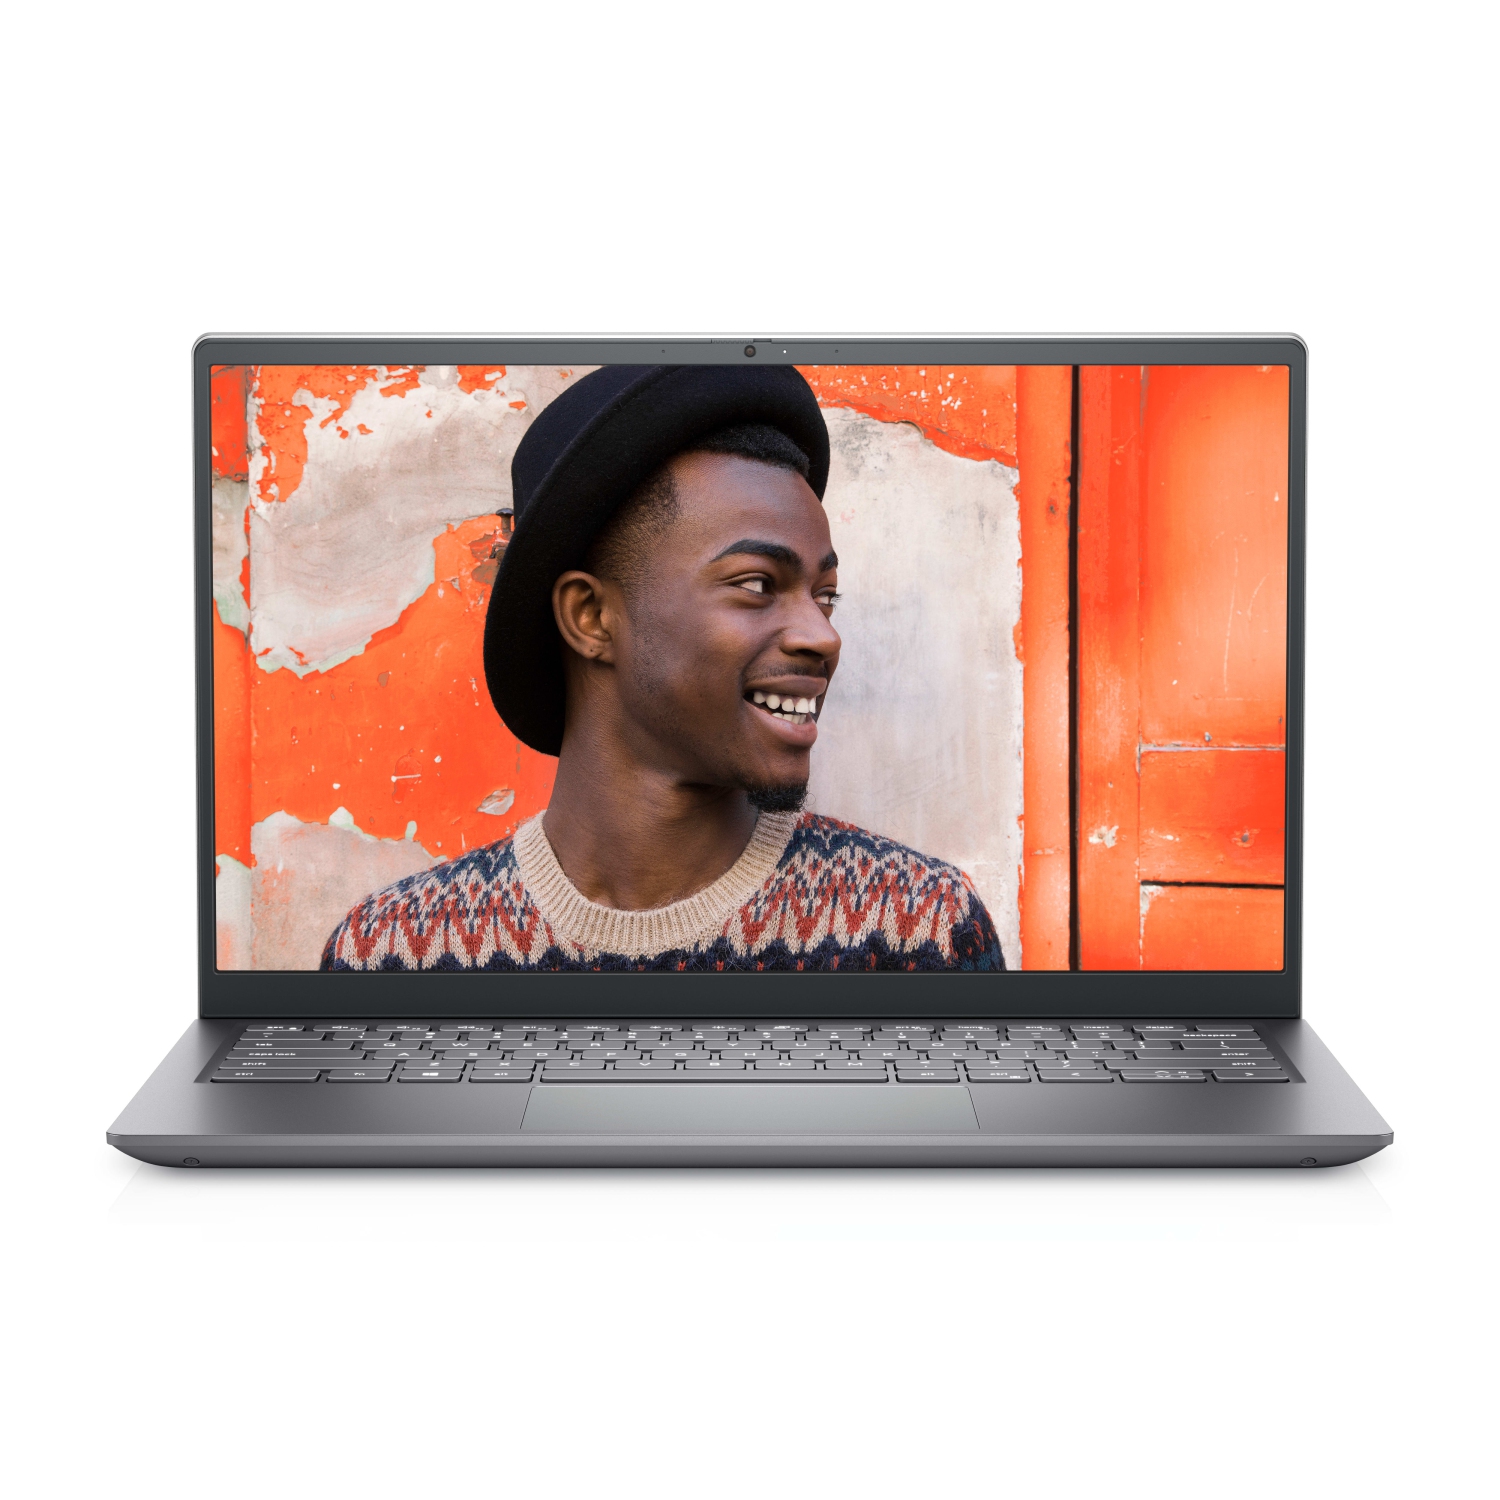 Refurbished (Excellent) – Dell Inspiron 5410 Laptop (2021) | 14" FHD | Core i7 - 2TB SSD - 64GB RAM | 4 Cores @ 5 GHz - 11th Gen CPU